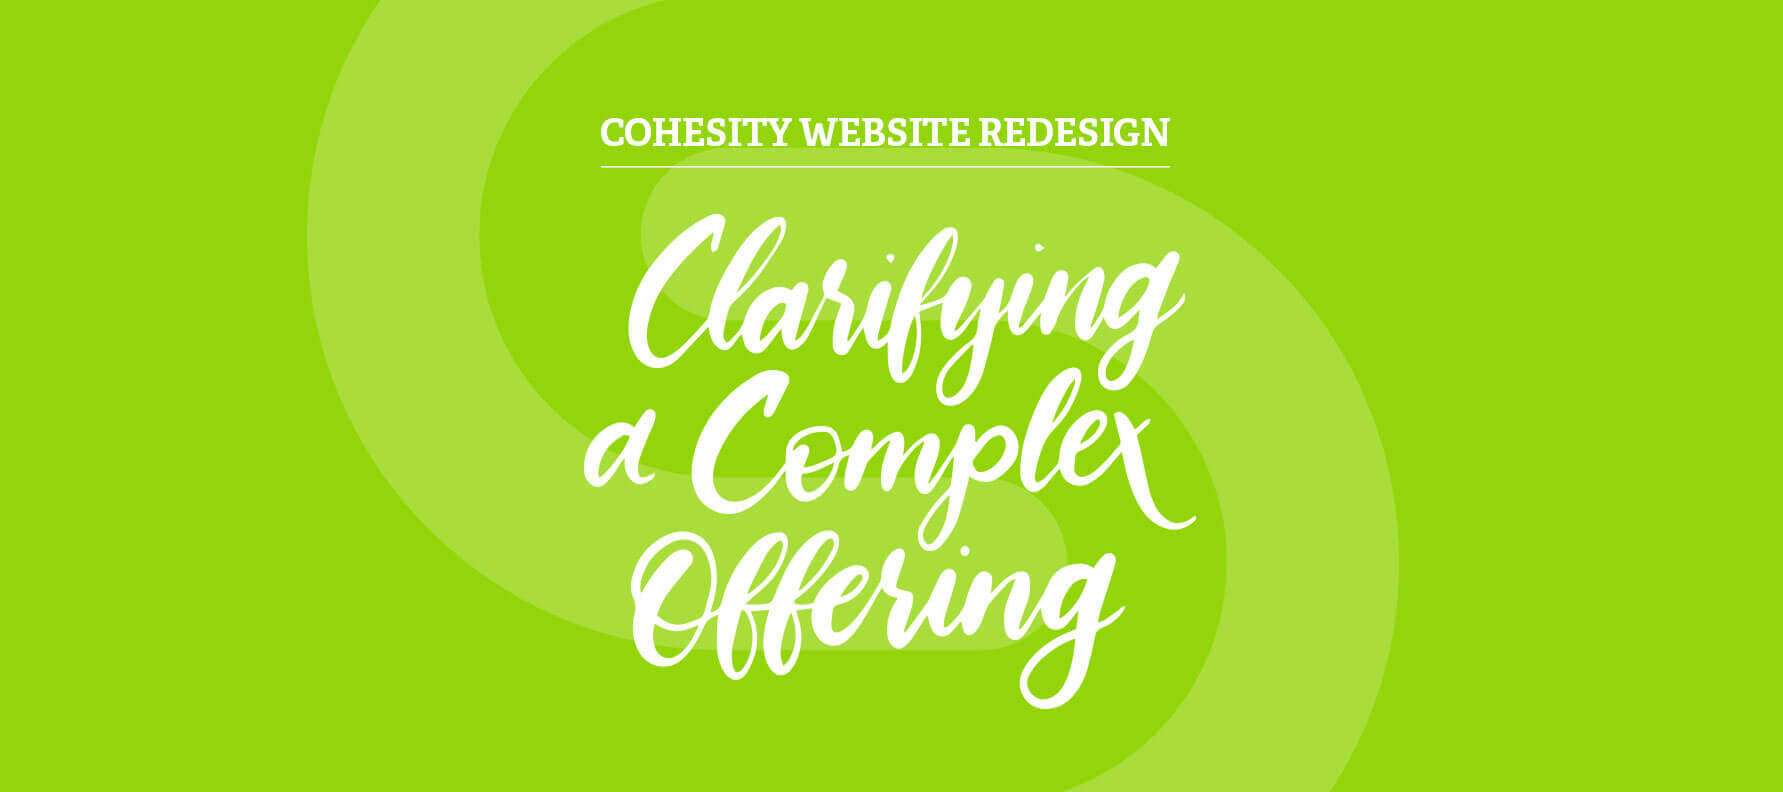 Cohesity Website Redesign, Clarifying a Complex Offering